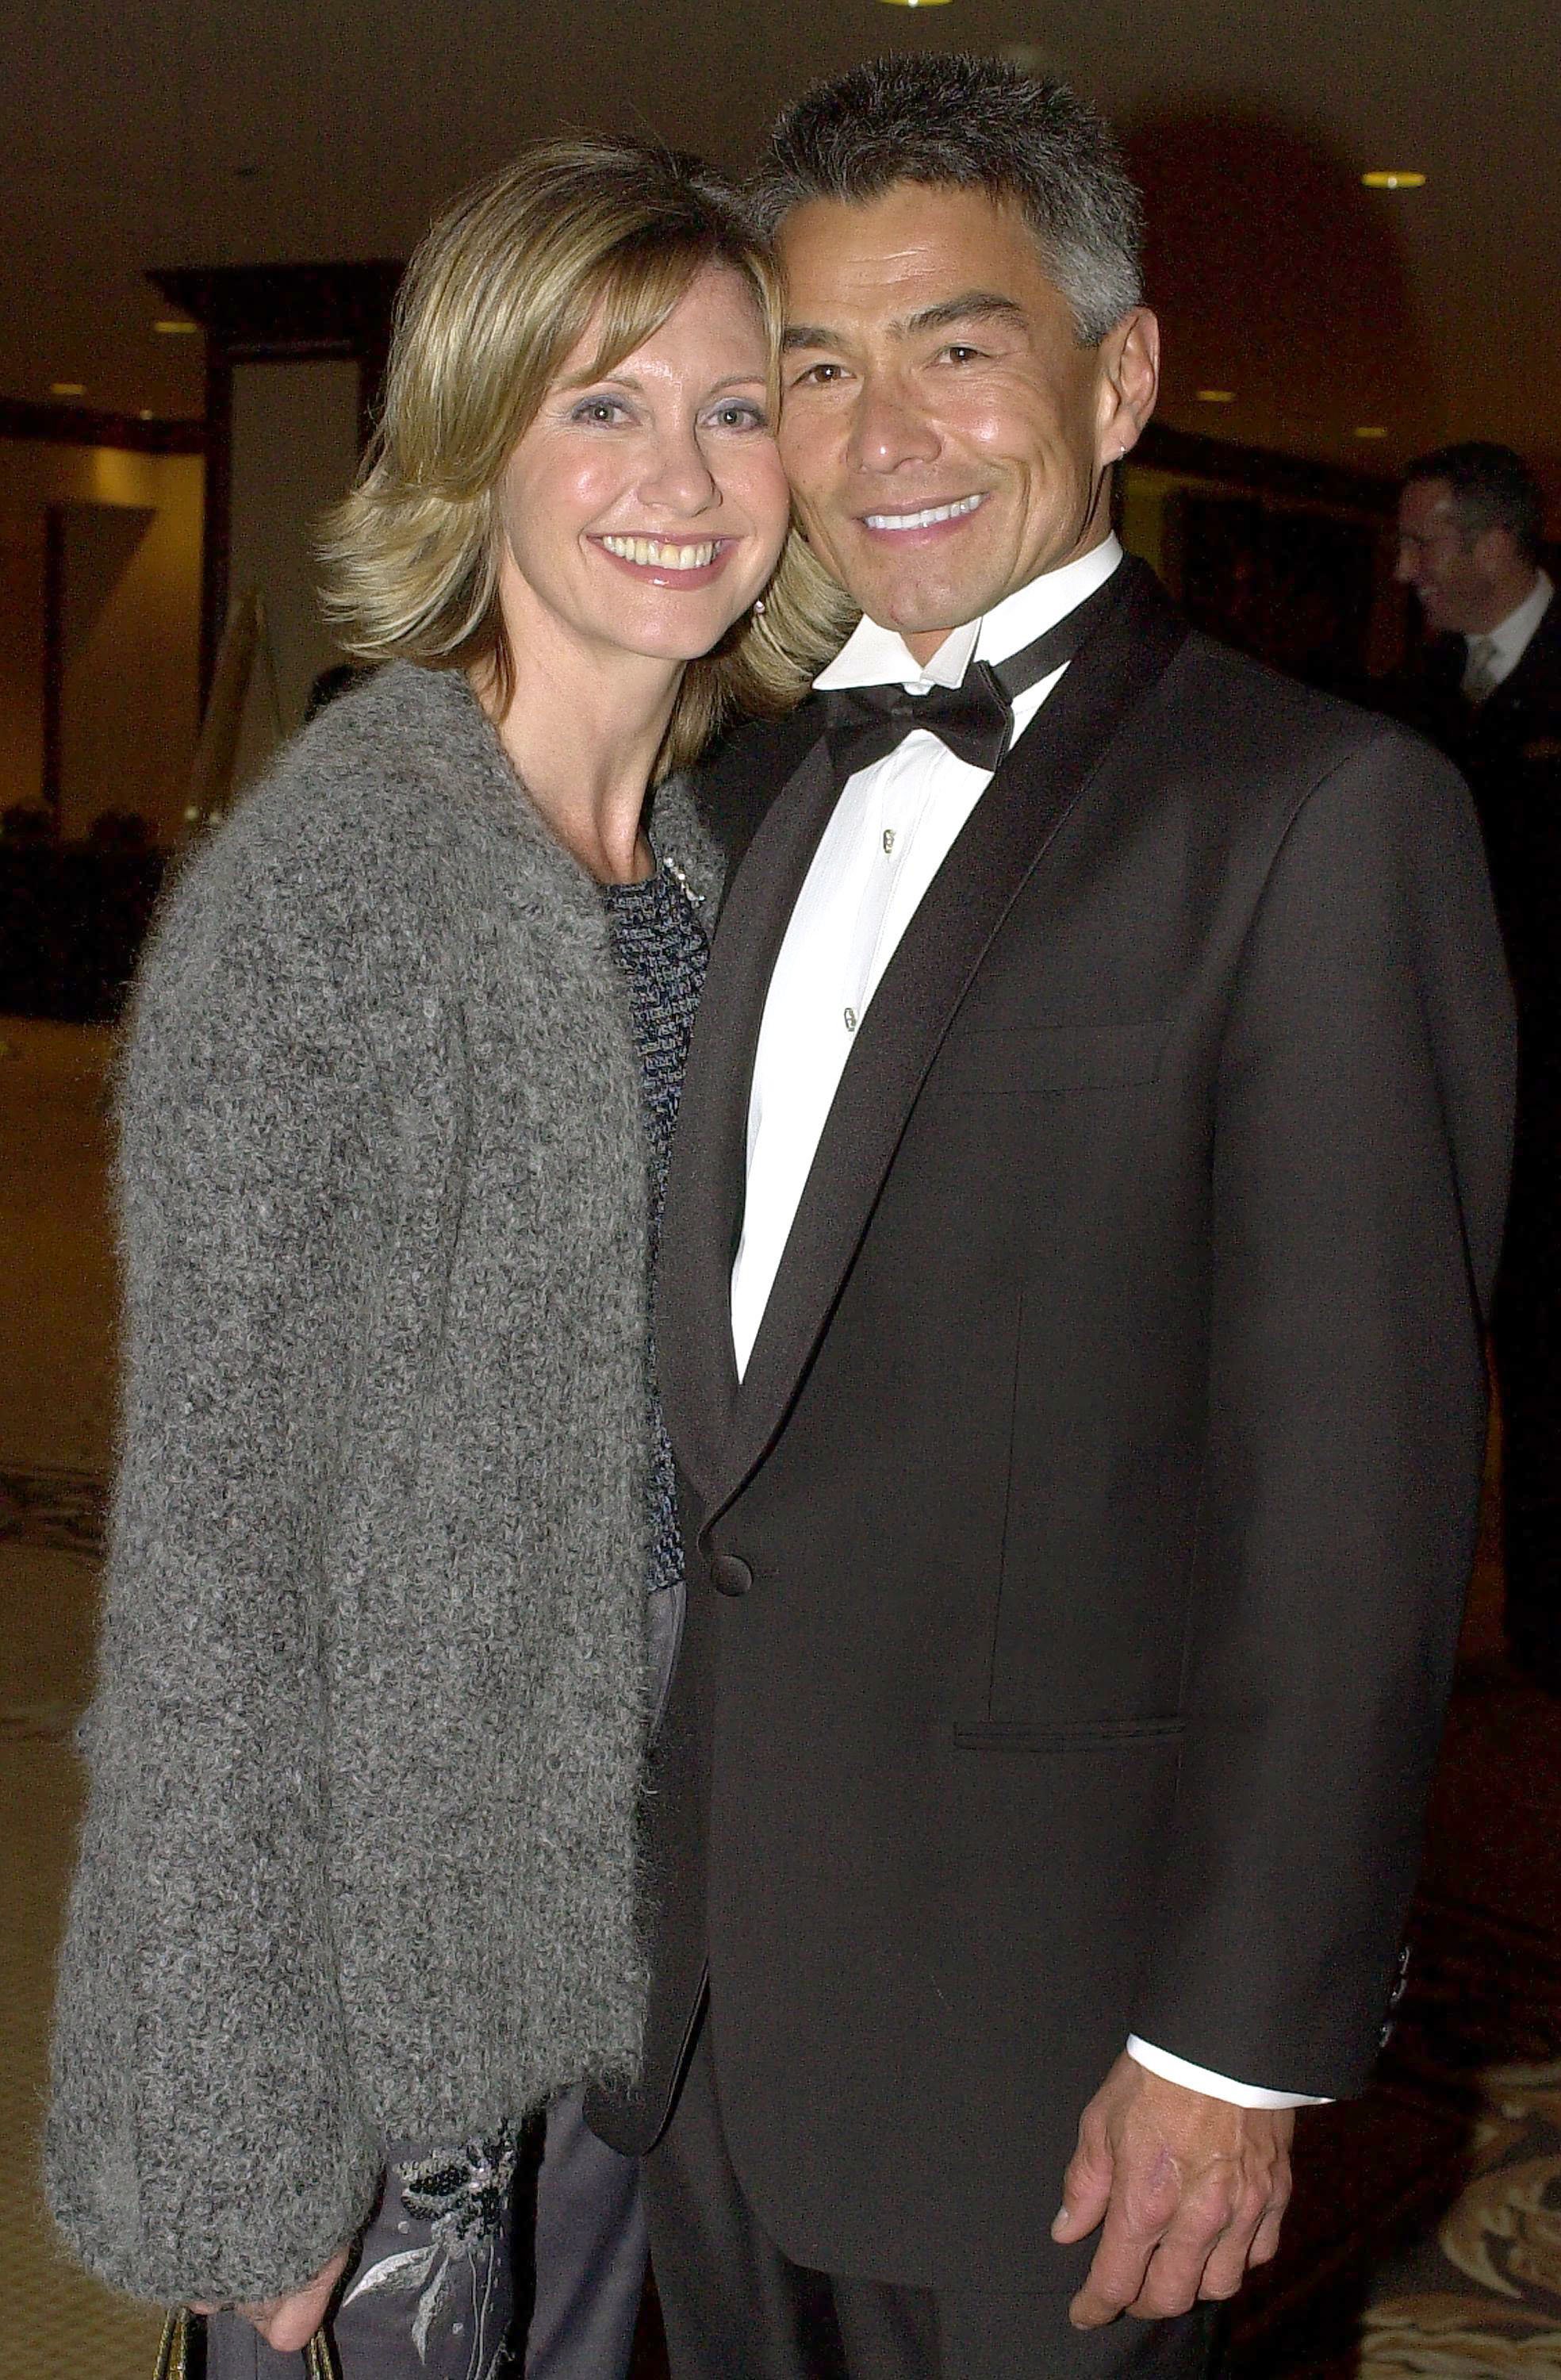 Olivia Newton-John with her boyfriend, Patrick McDermott, at the 10th Annual Human Rights Campaign Gala, on February 17, 2001, in Los Angeles, California. | Source: Getty Images